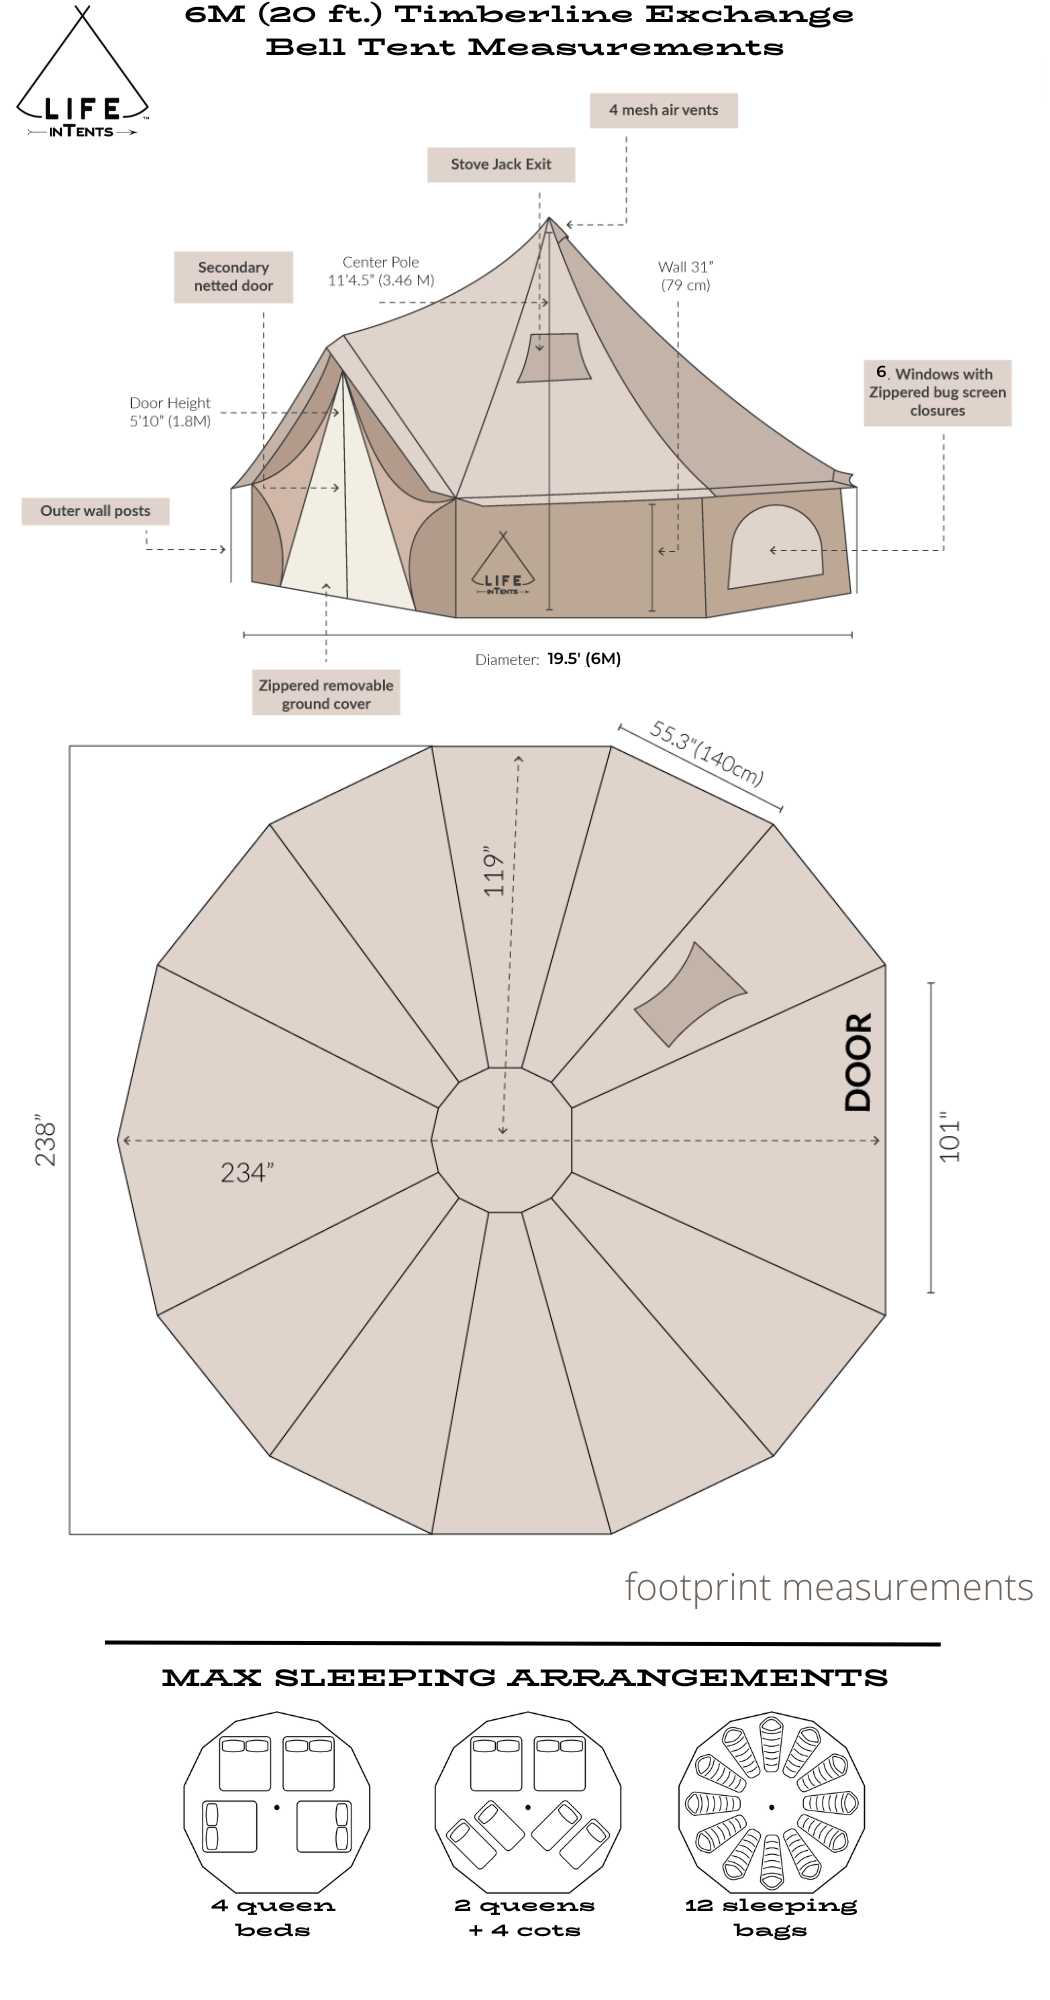 20' commercial bell tent specs